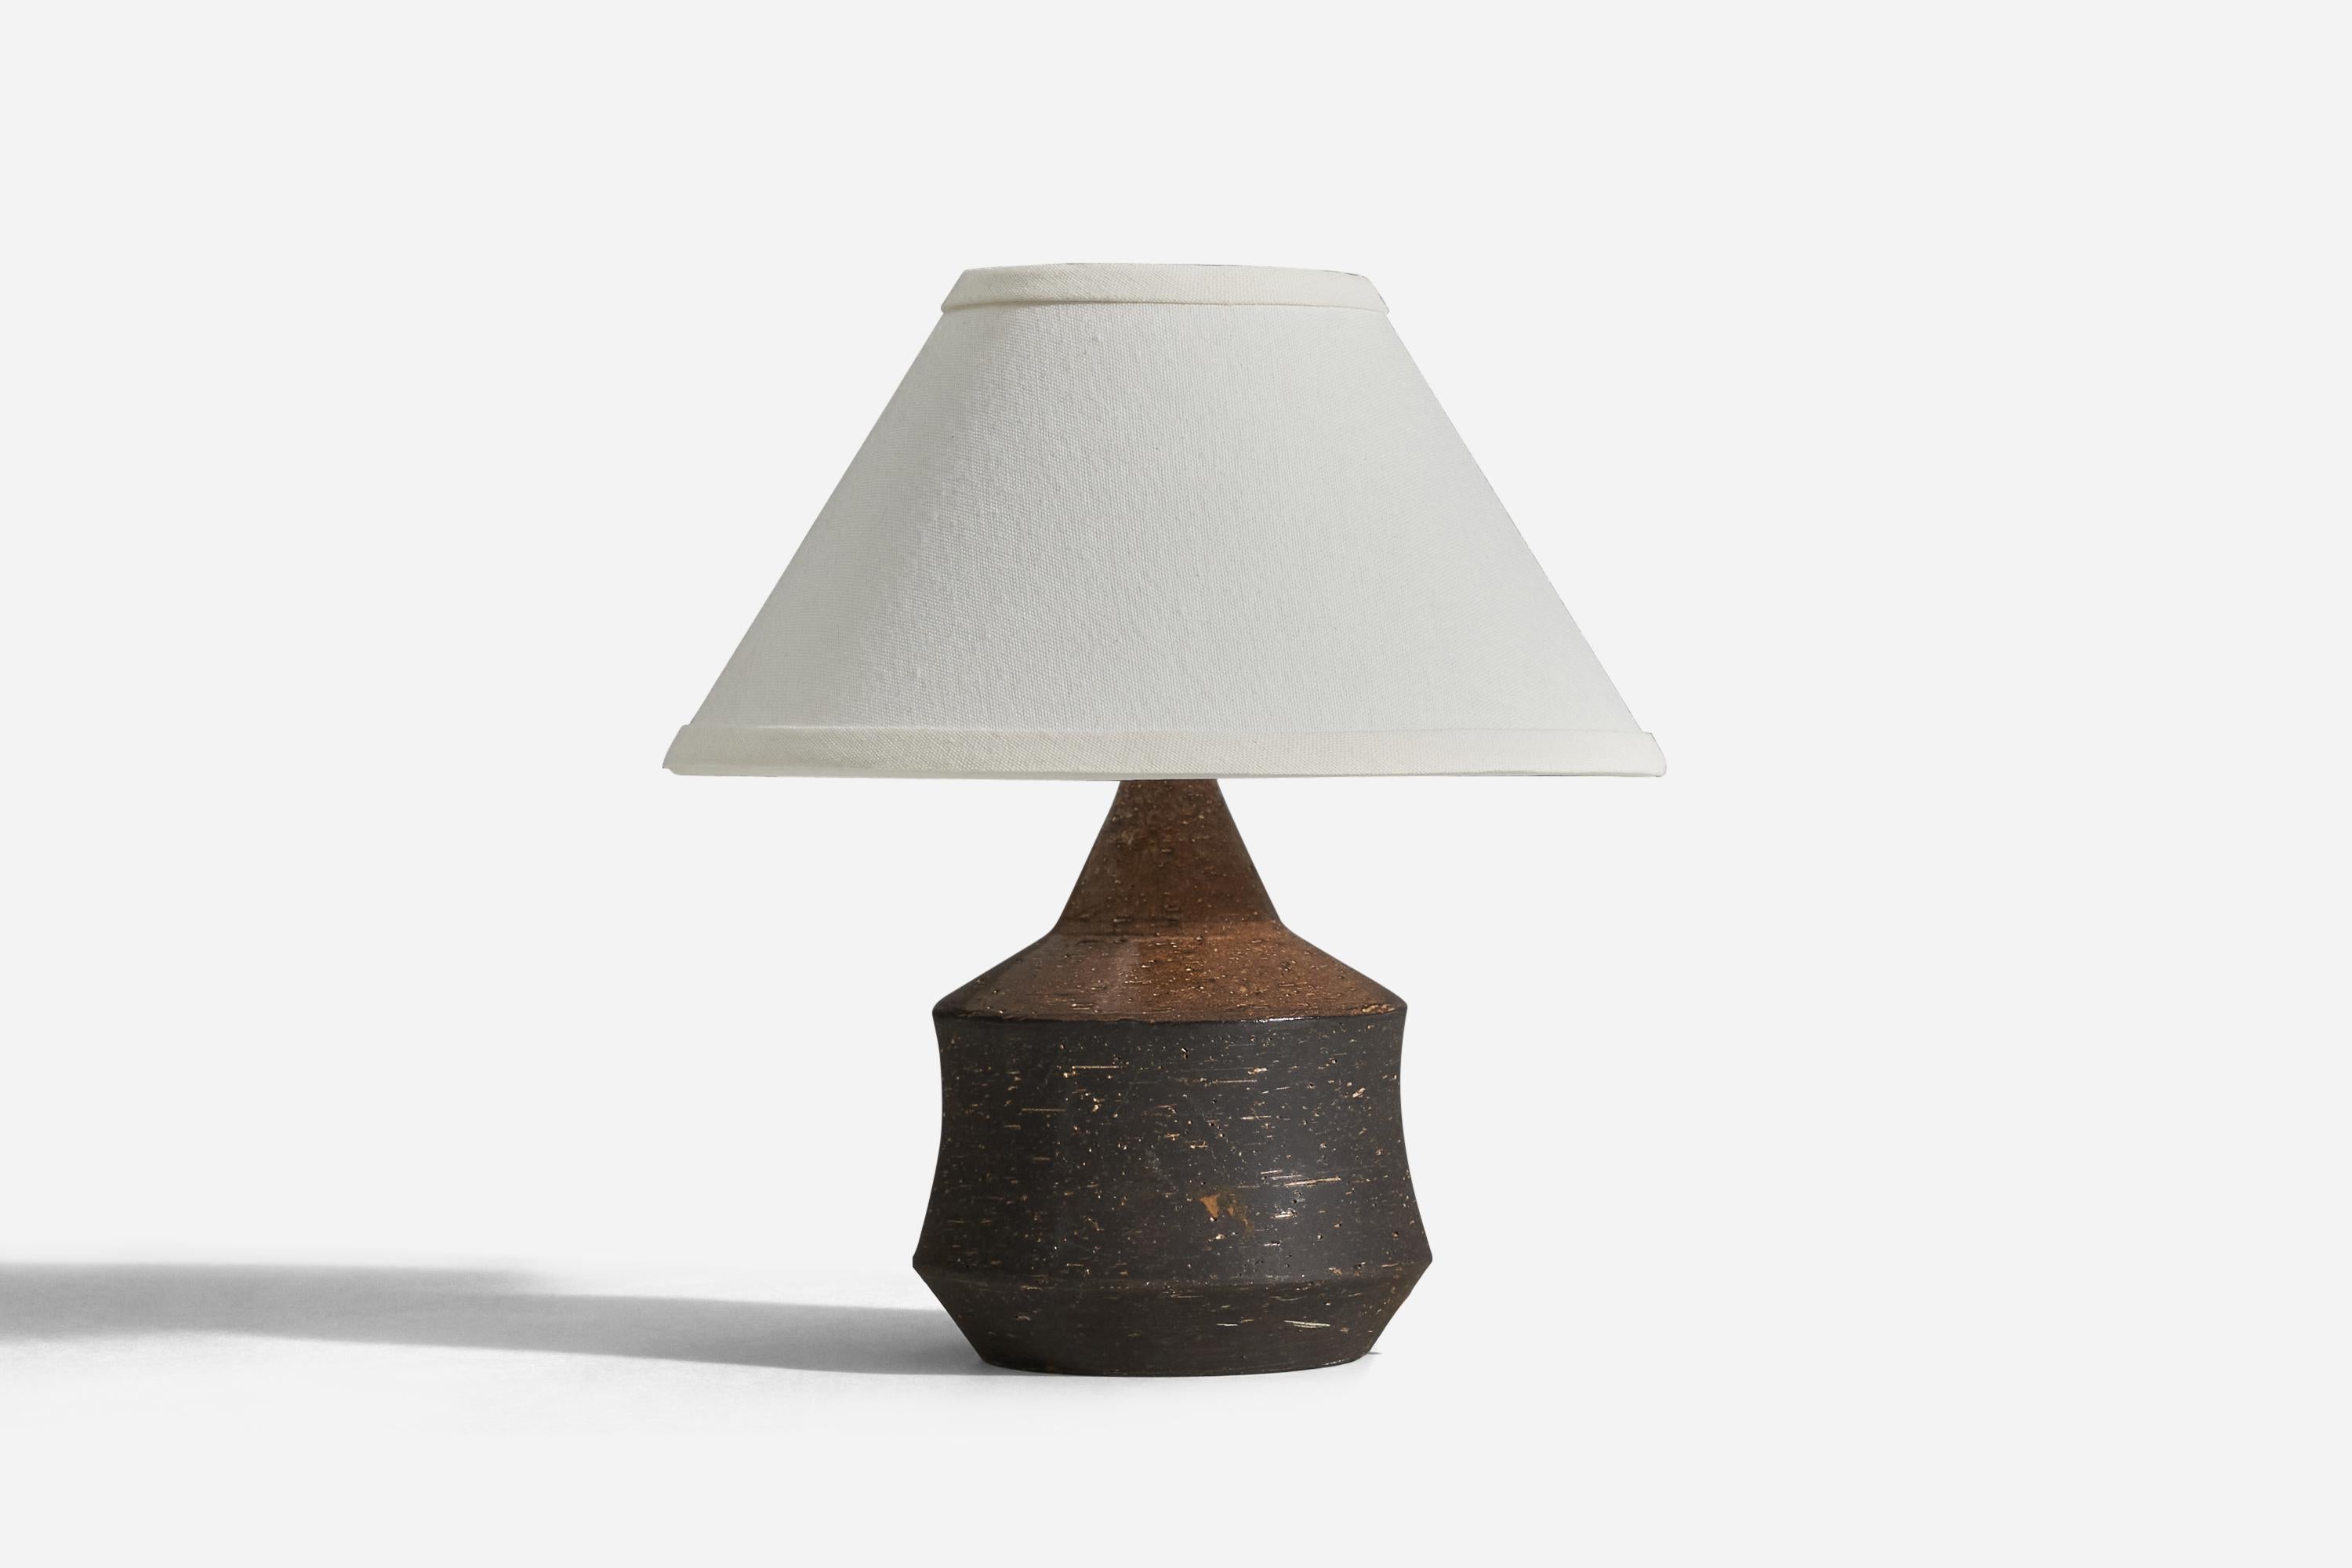 A brown glazed stoneware table lamp designed by Bo Bergström and produced by Svensk Form, Sweden, 1950s.

